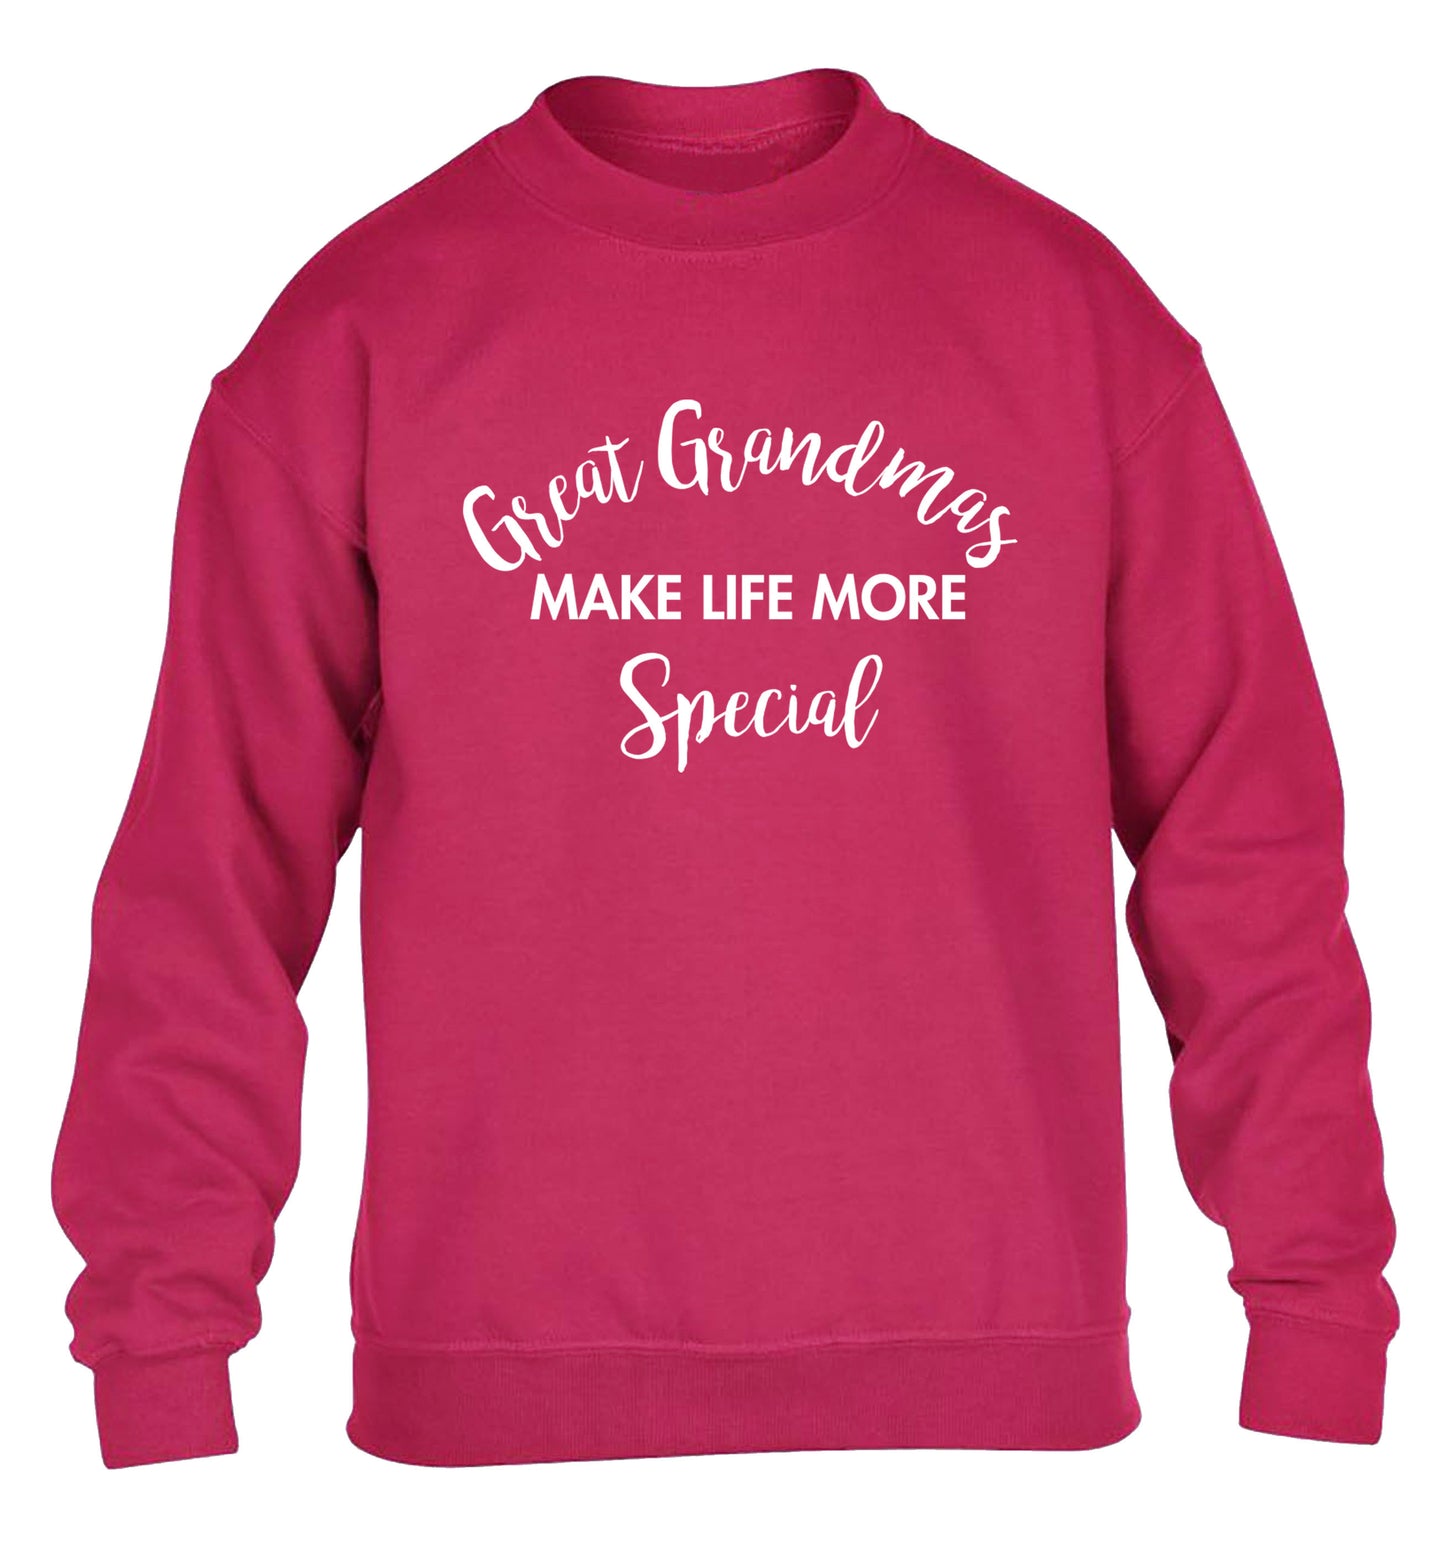 Great Grandmas make life more special children's pink sweater 12-14 Years